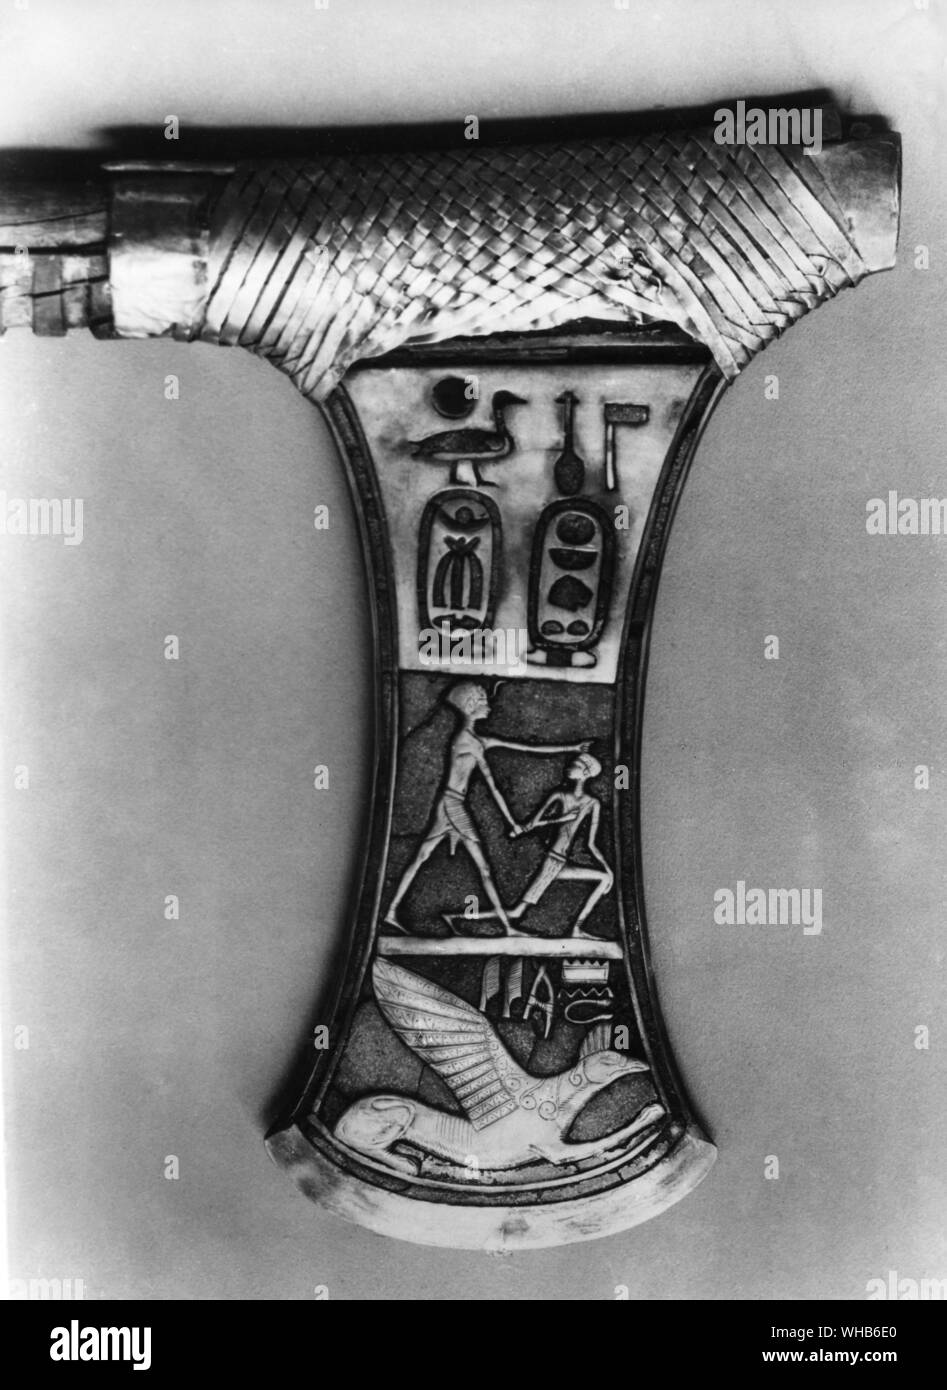 Ceremonial Battle-axe of Amosis I New Kingdom XVIII dynasty 1570-1545 BC - Ahmose I was a pharaoh of ancient Egypt and the founder of the Eighteenth dynasty.. Stock Photo